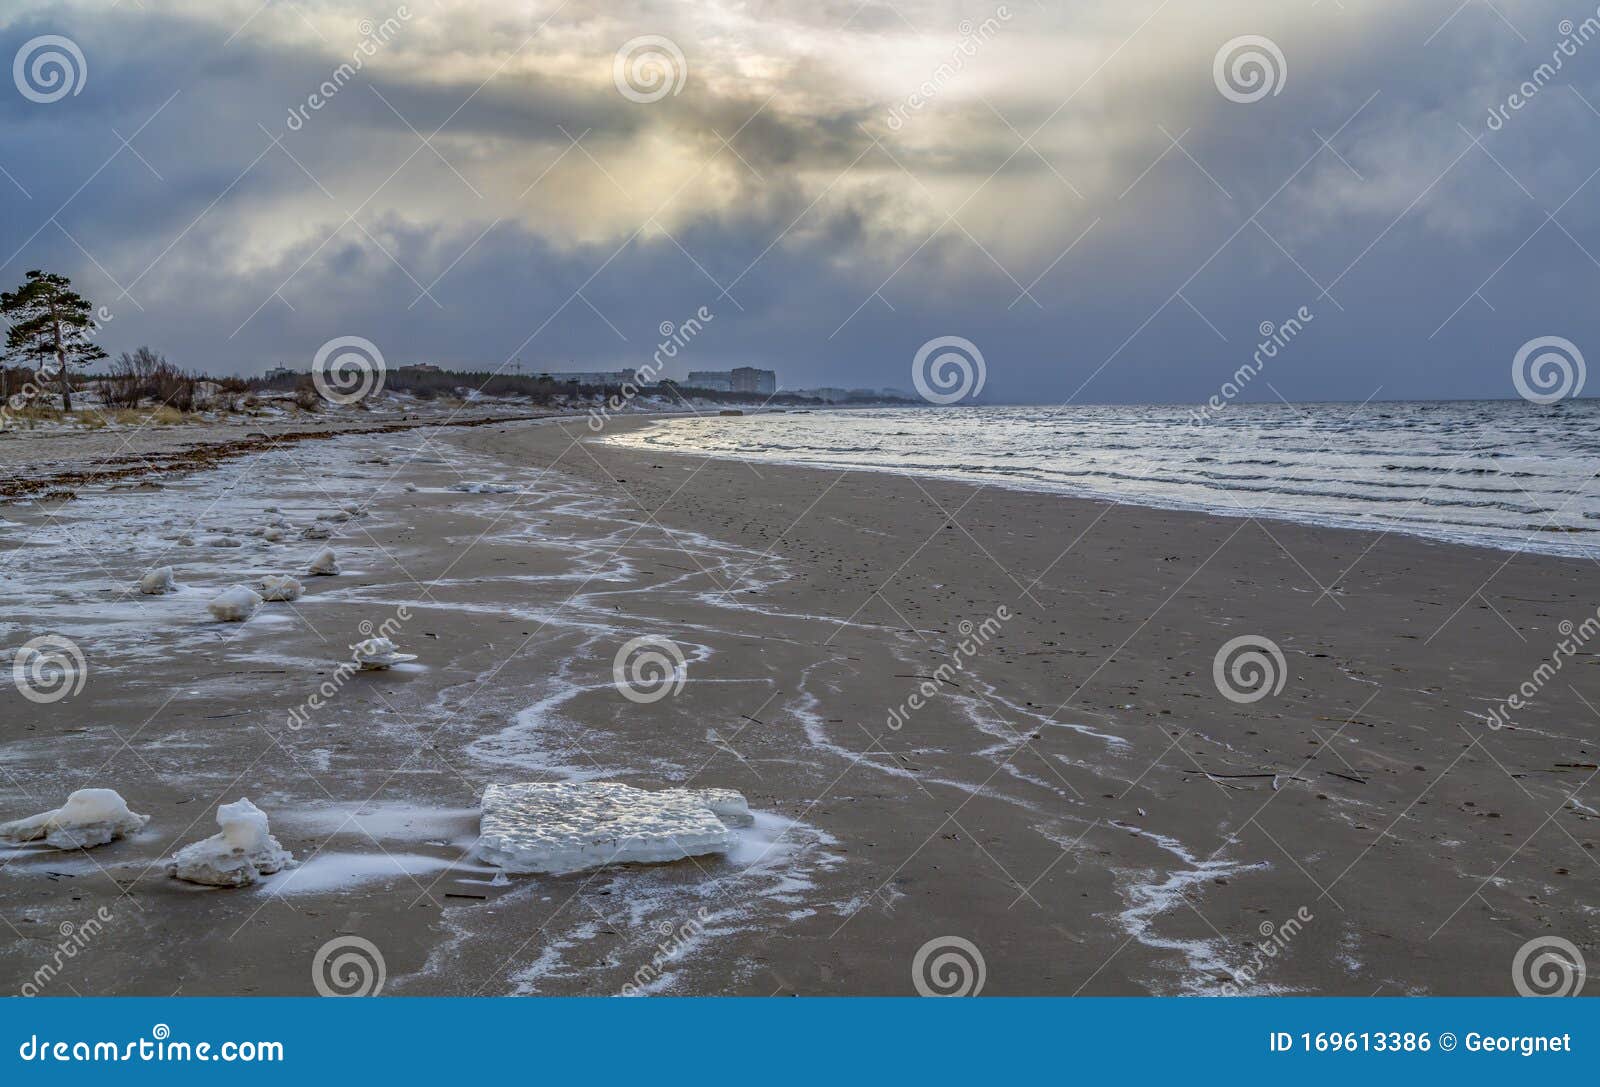 The bay of the cold sea. stock photo. Image of walks - 169613386